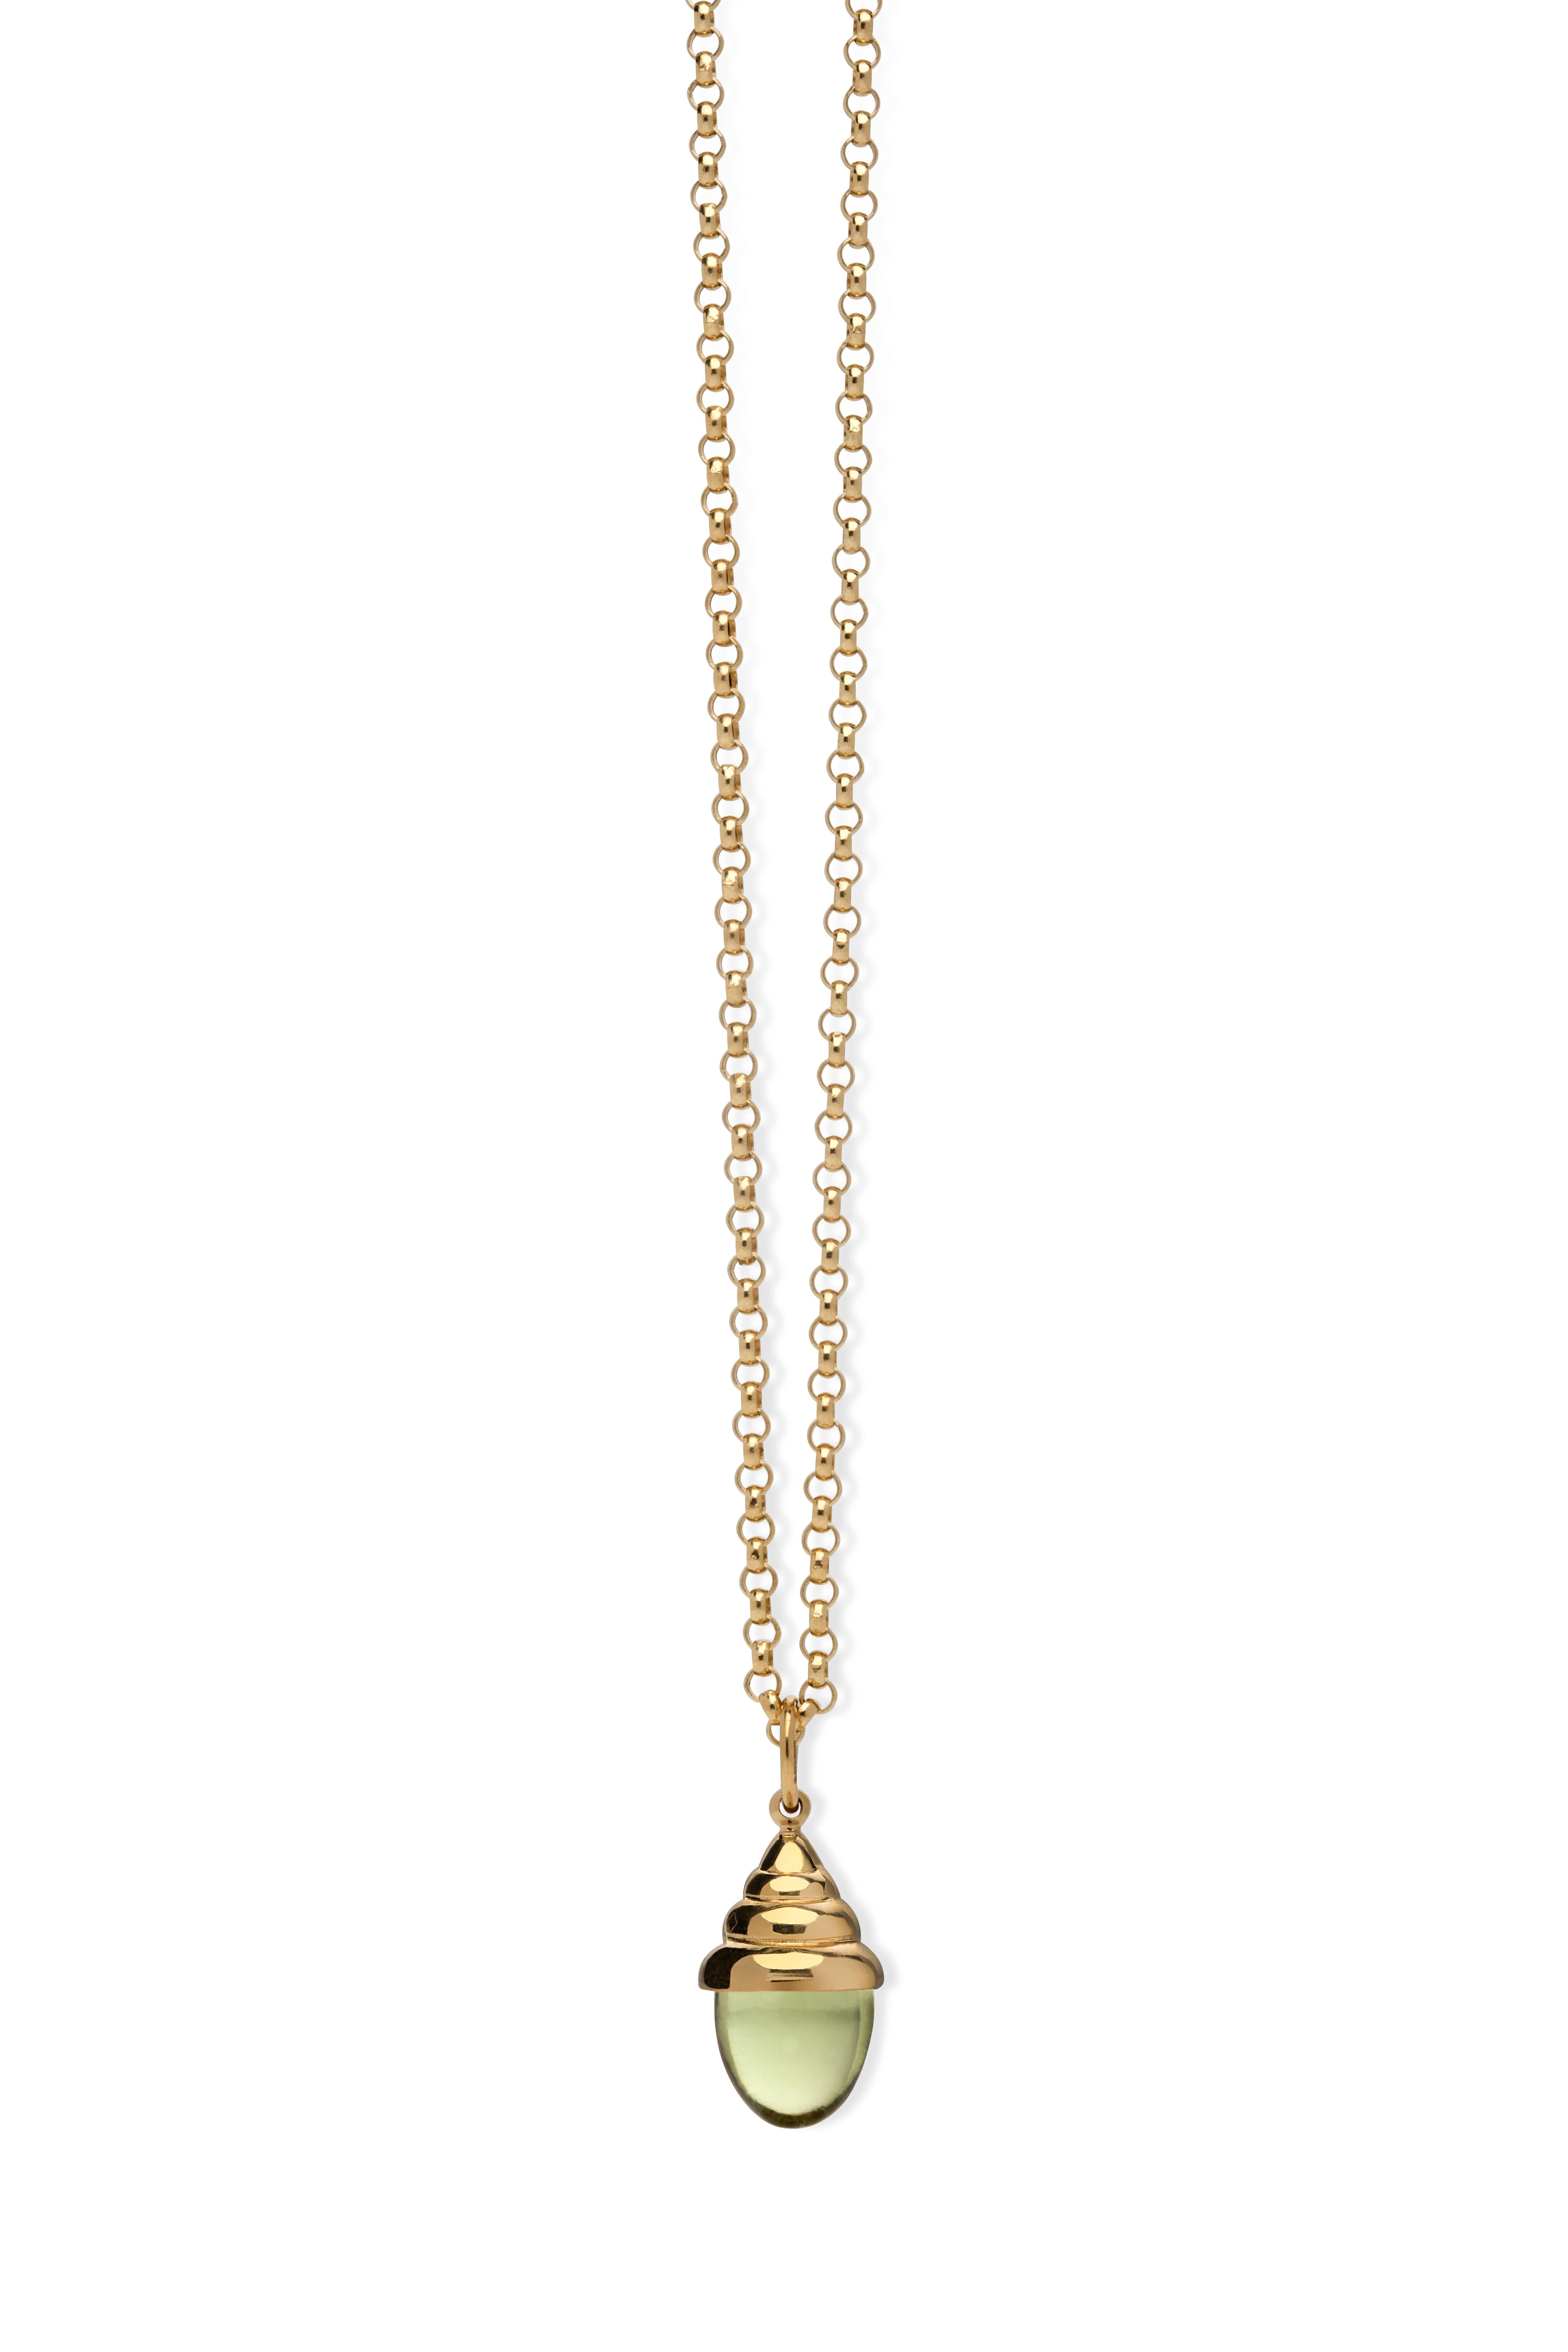 Torba
18kt yellow gold pendant, 10x10mm stone
These luxuriously styled pendants can stand on their own. In 18ct solid yellow gold with 10x10mm smooth cut stone, they measure 22mm in length and 10mm at their widest point. They come in a variety of